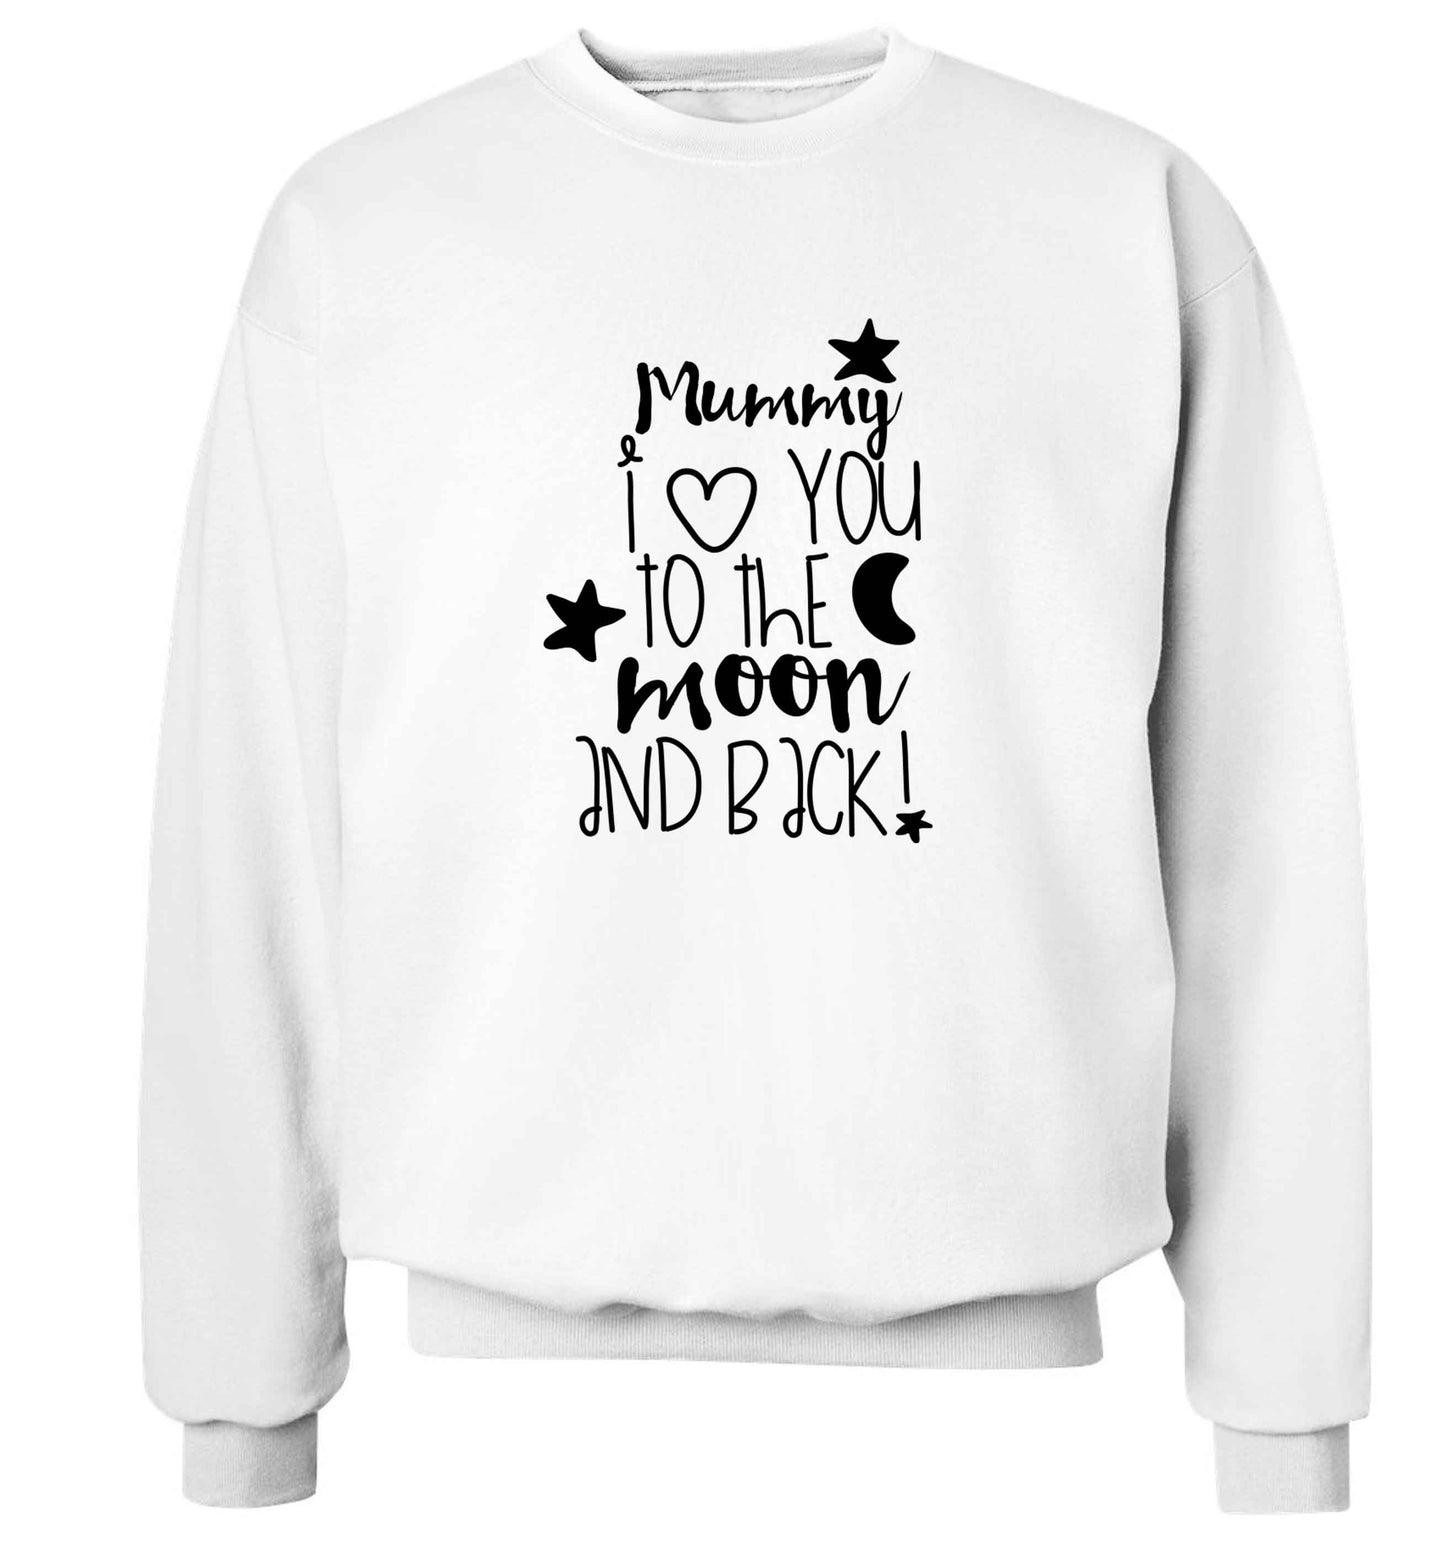 Mummy I love you to the moon and back adult's unisex white sweater 2XL